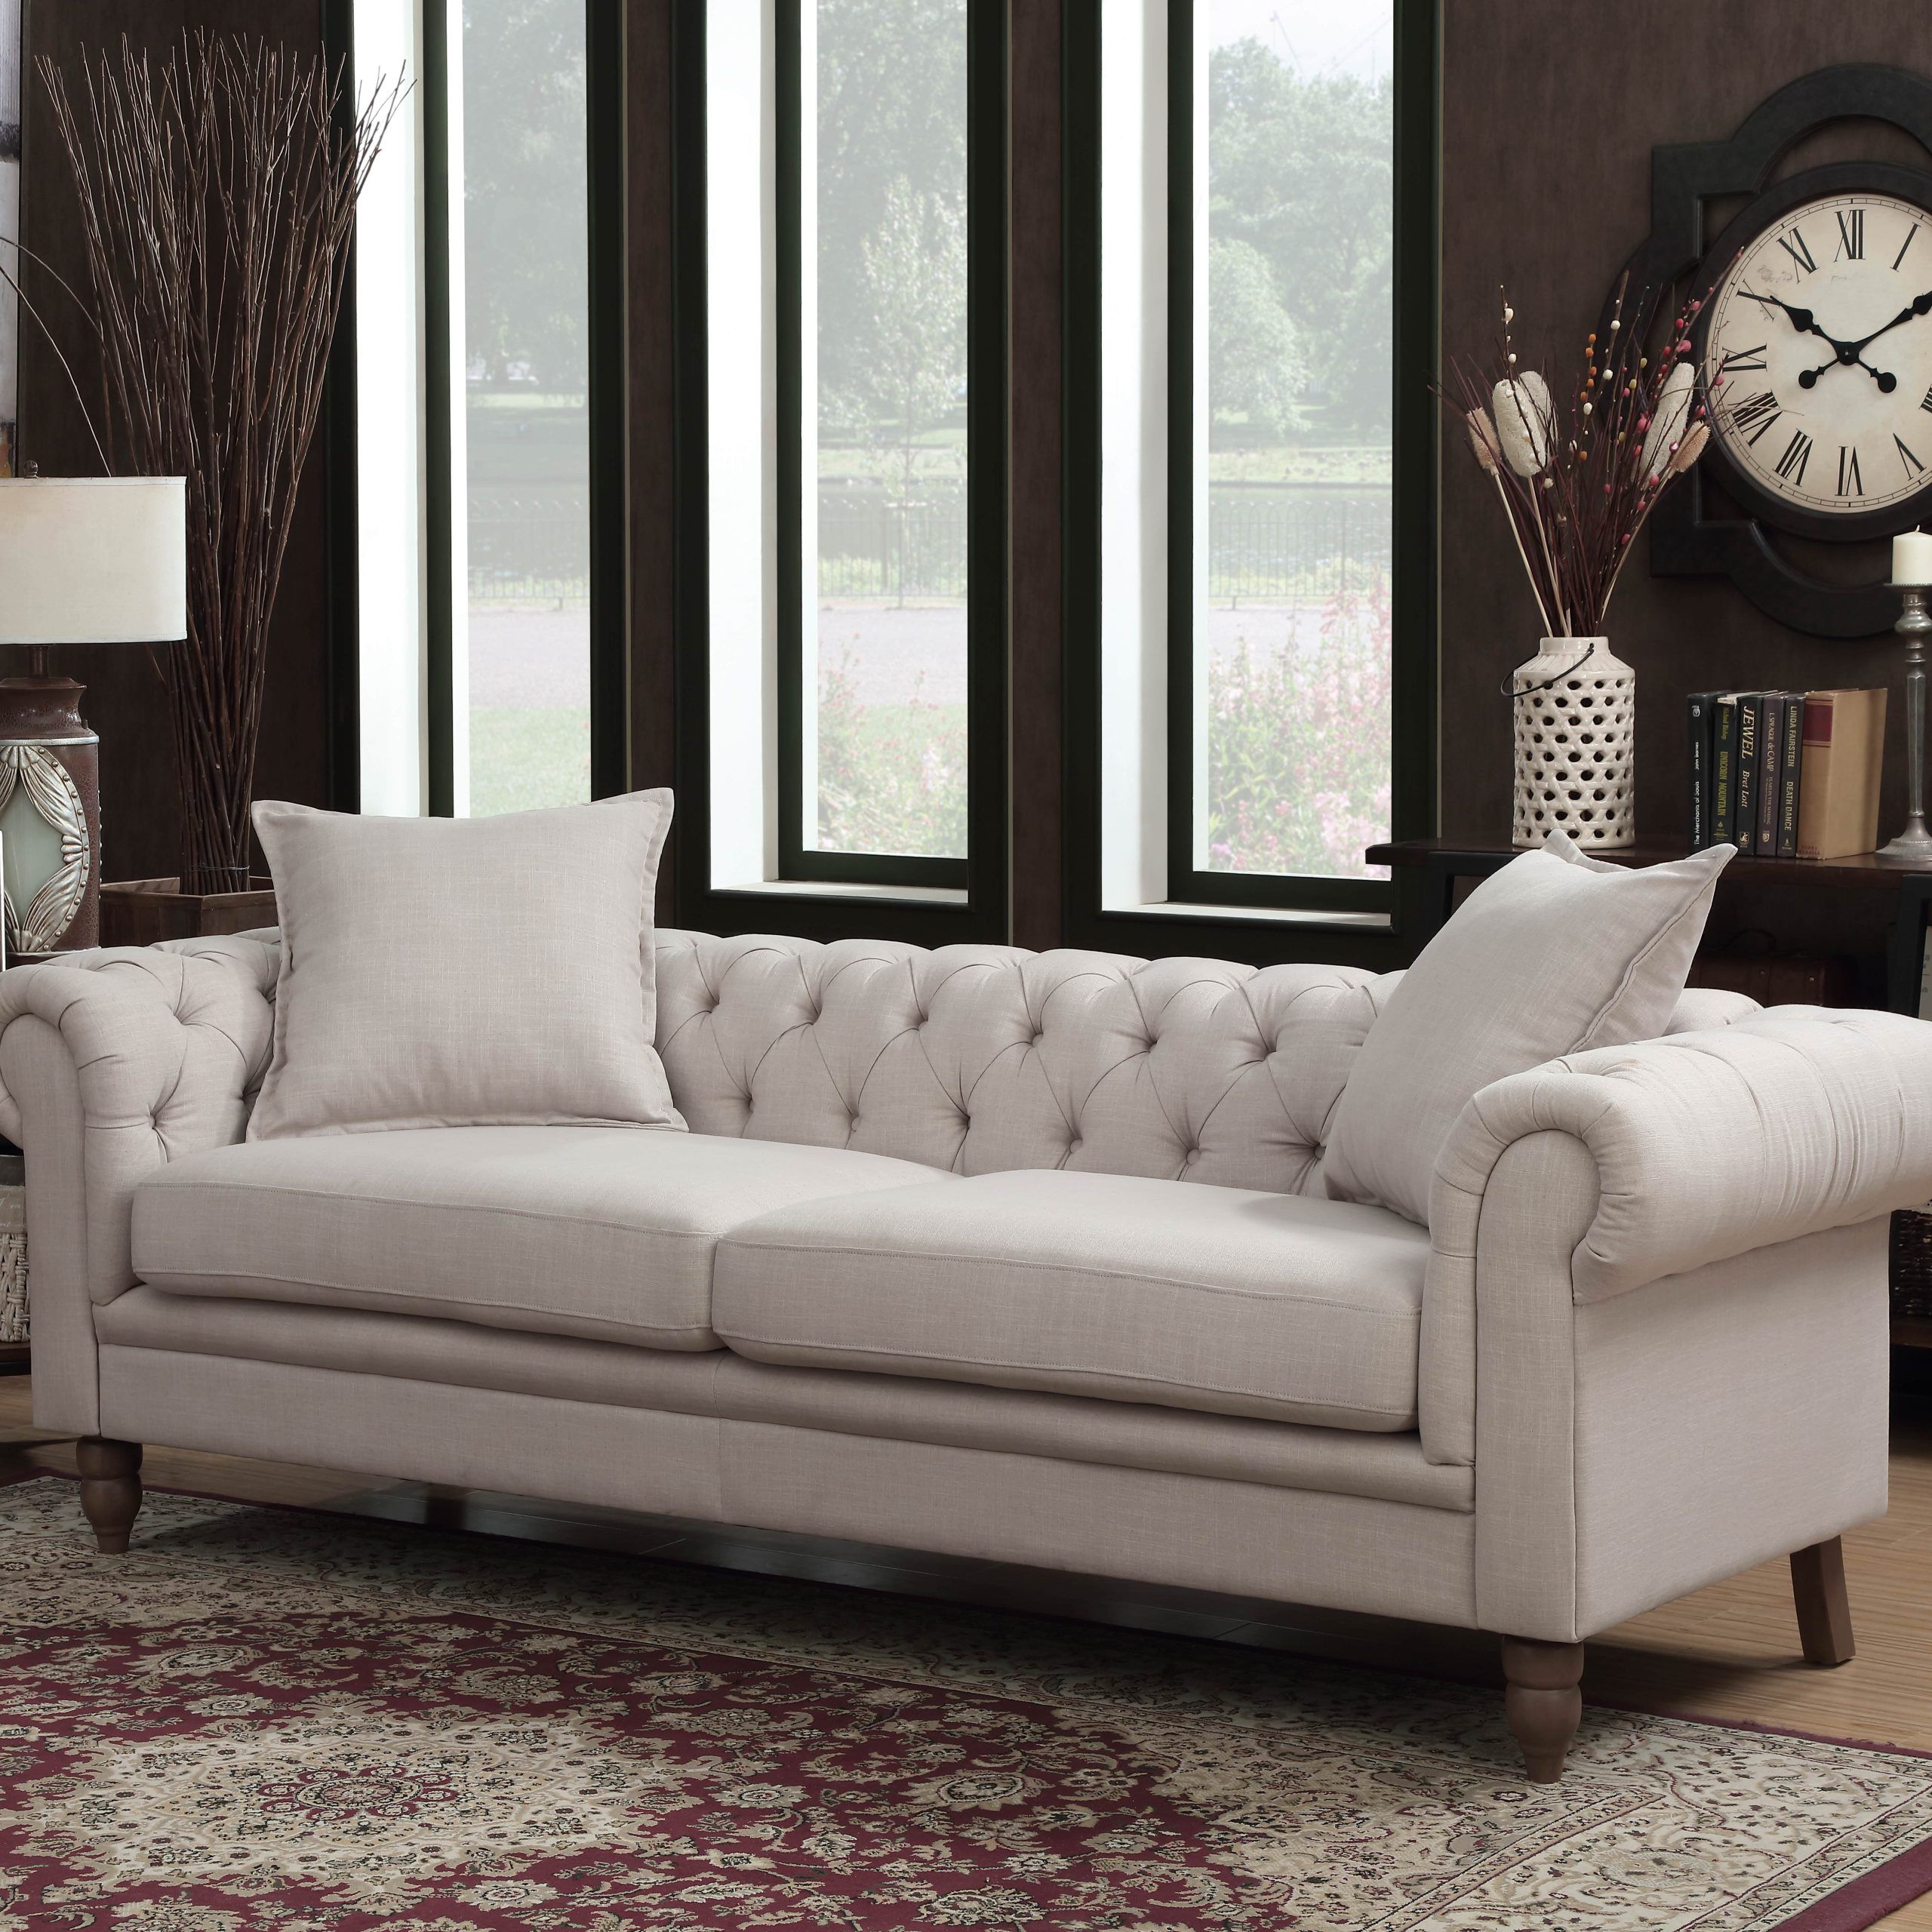 Juliet Collection Contemporary Linen Fabric Upholstered Button Tufted Intended For Tufted Upholstered Sofas (View 9 of 20)